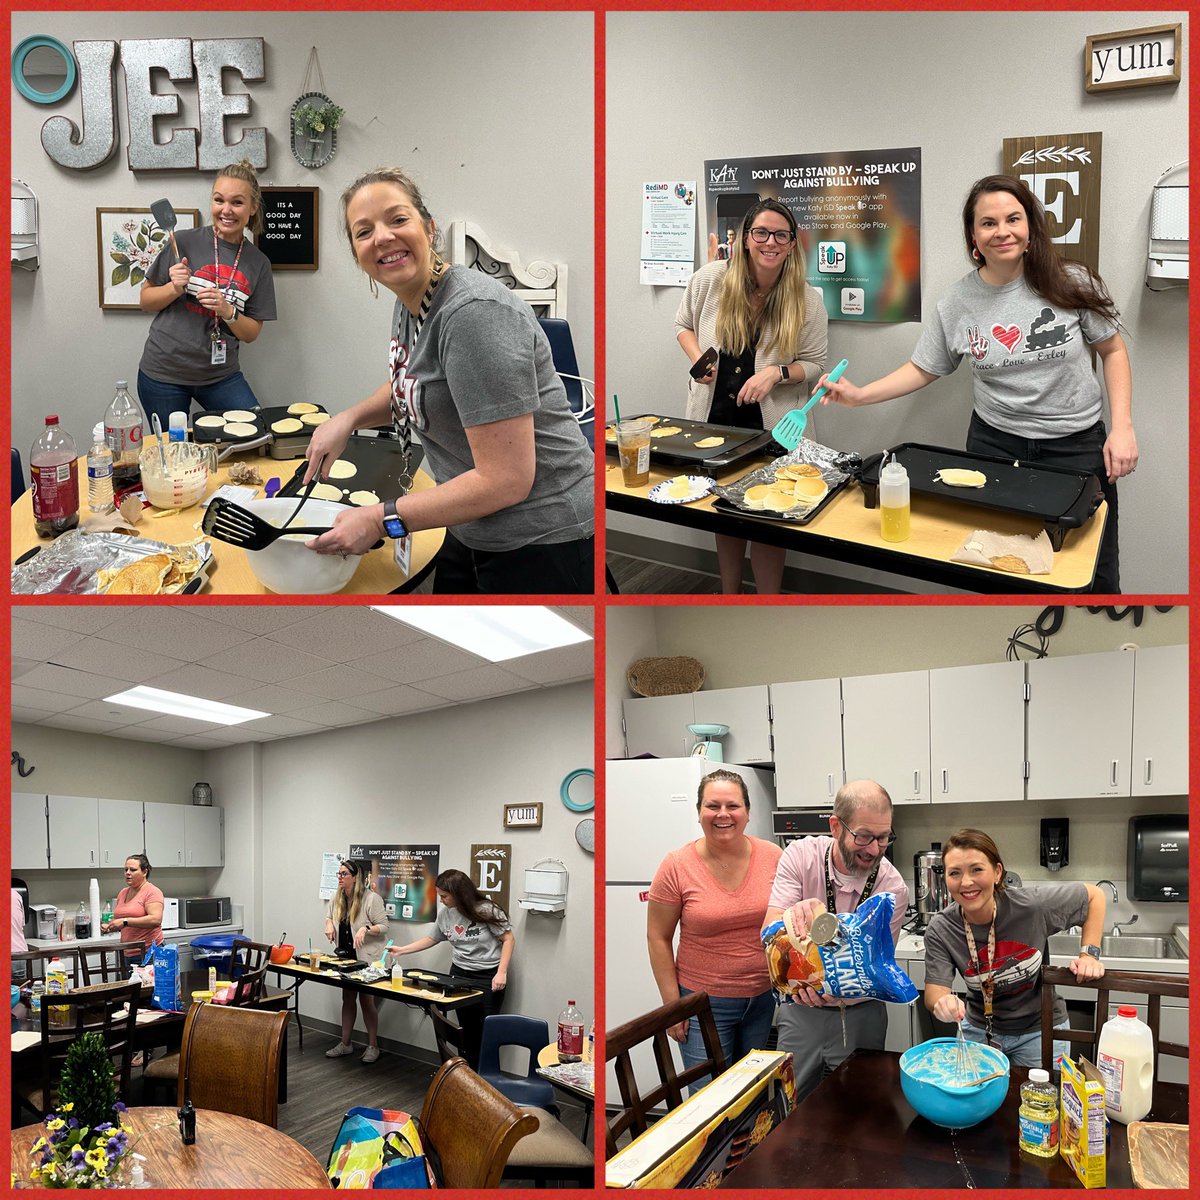 Thank you to our amazing admin for our breakfast treat today!  #exleytweets 🥞